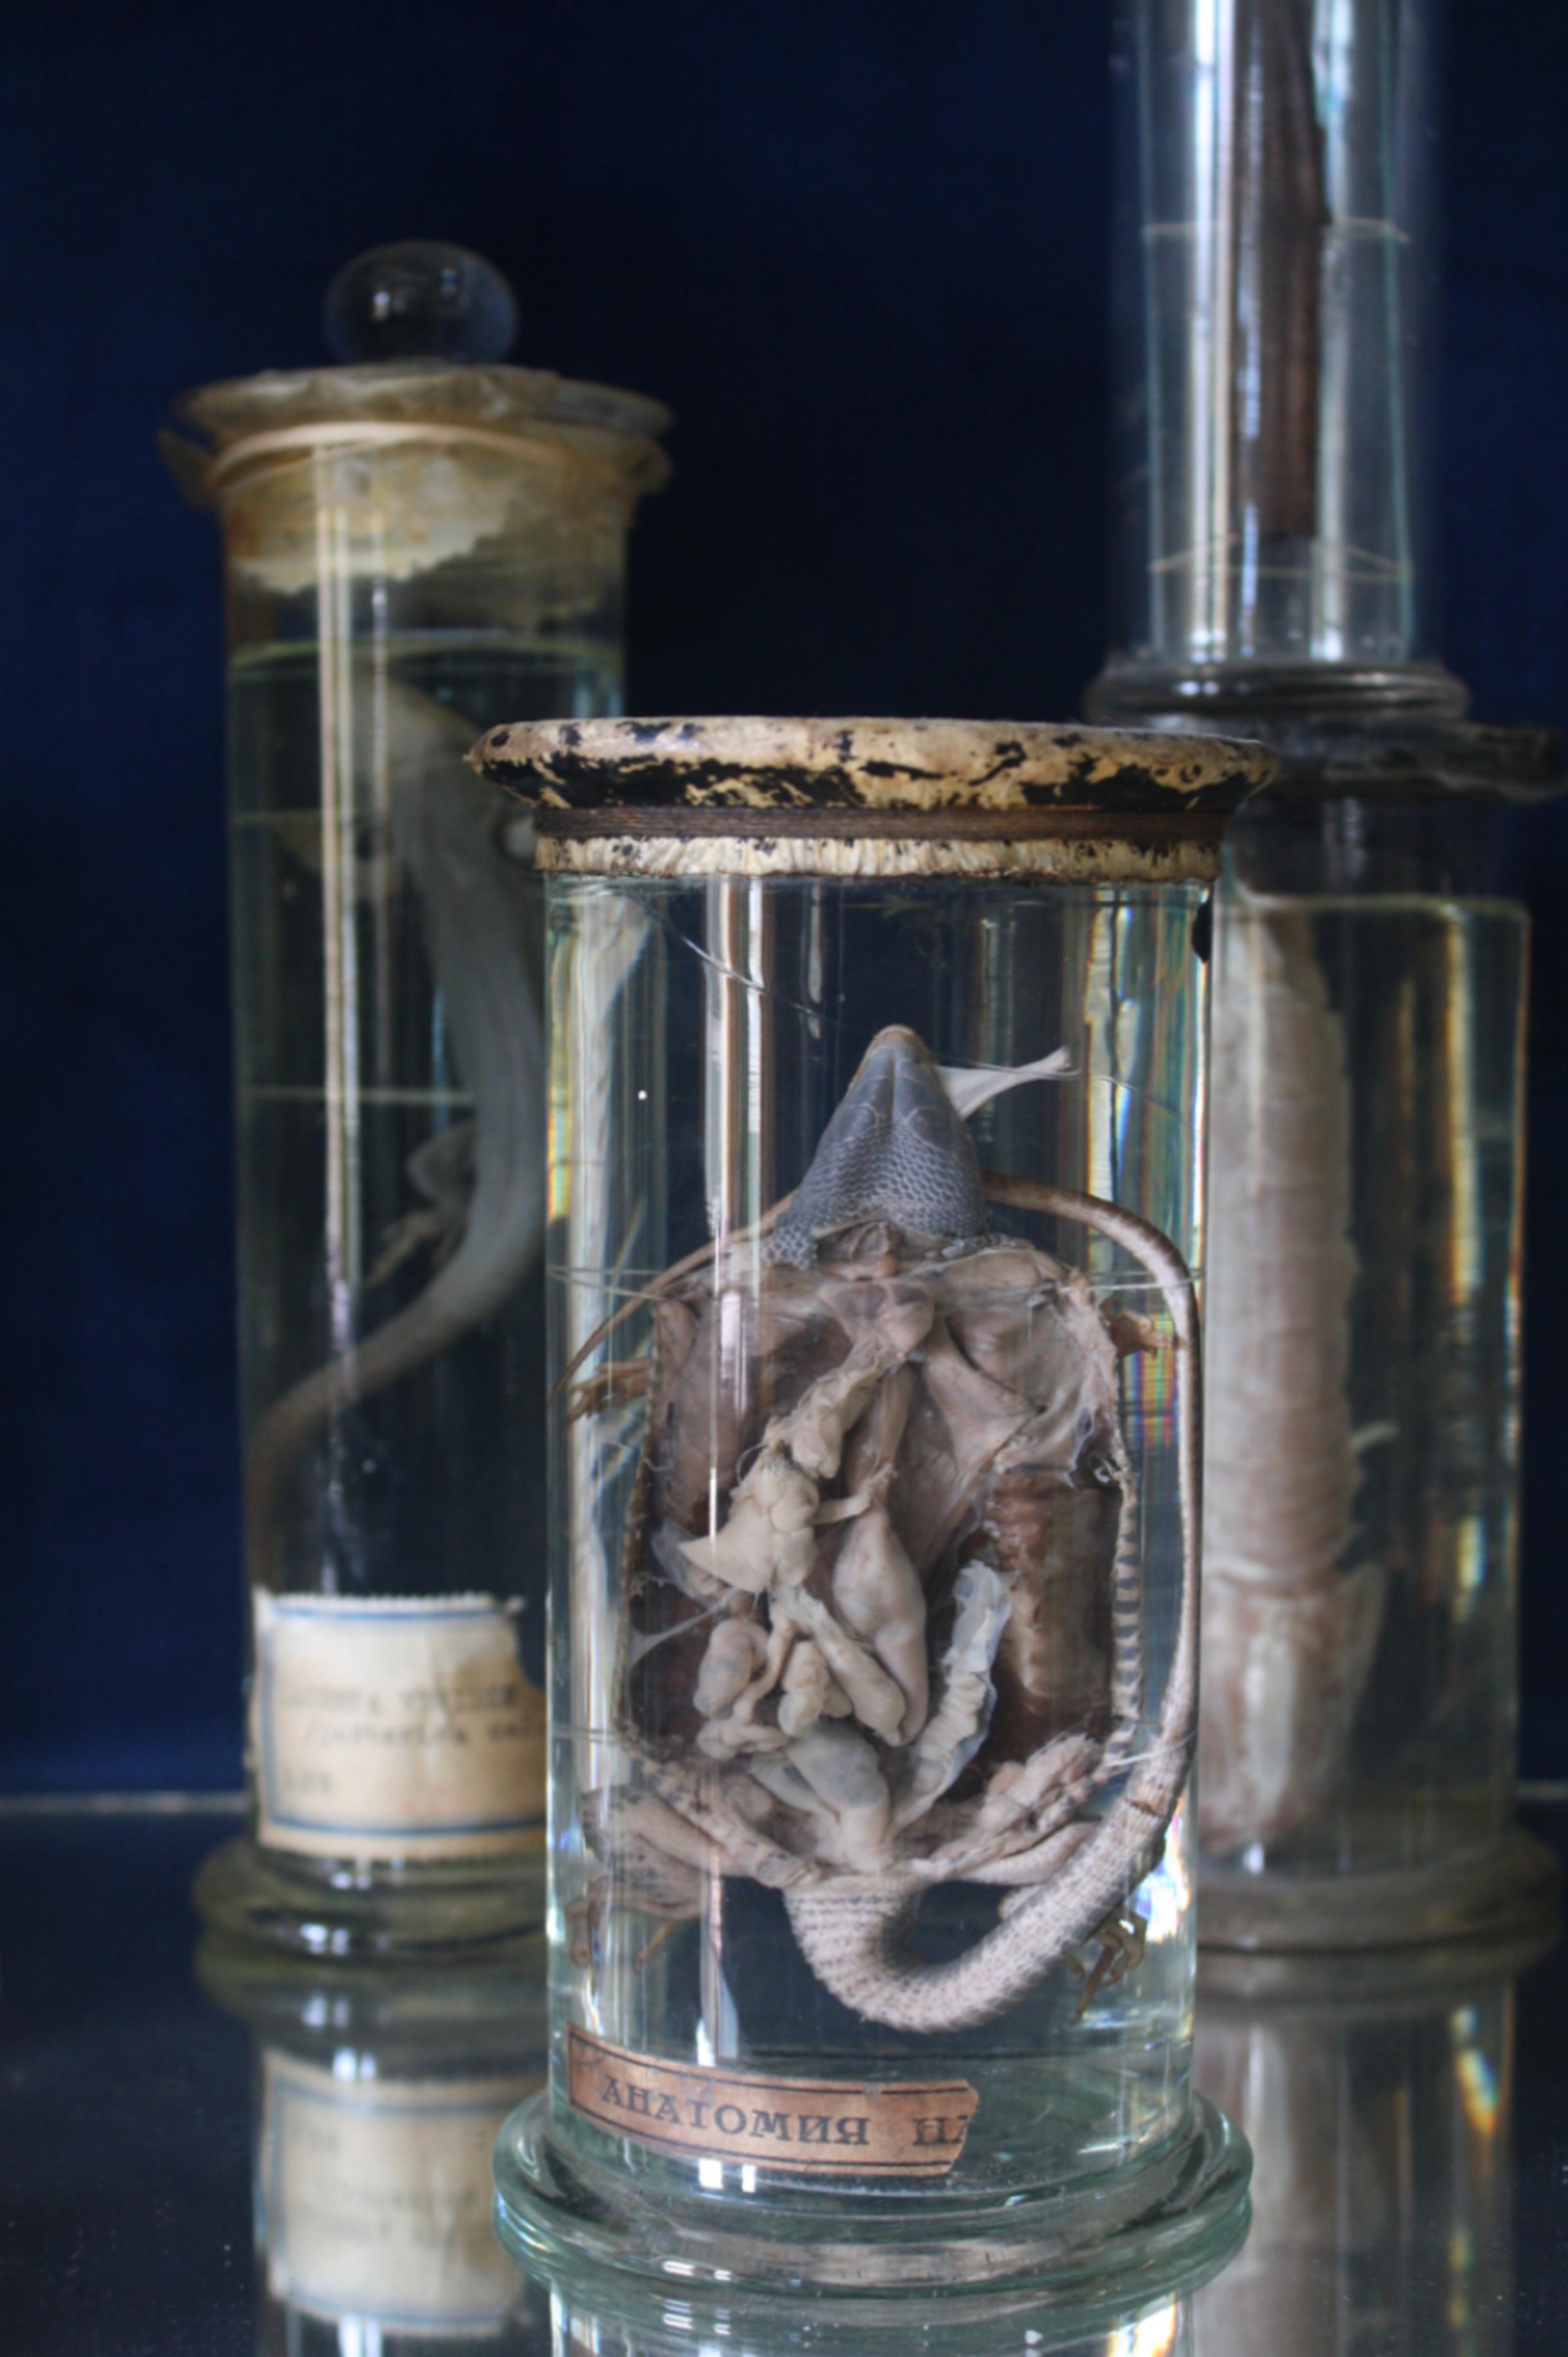 A collection of 38 wet specimens, all in excellent condition with good liquid levels.
These are European in origin, some with labels and museum numbers.
These specimens range in age from early to end of the second quarter of the 20th century. They